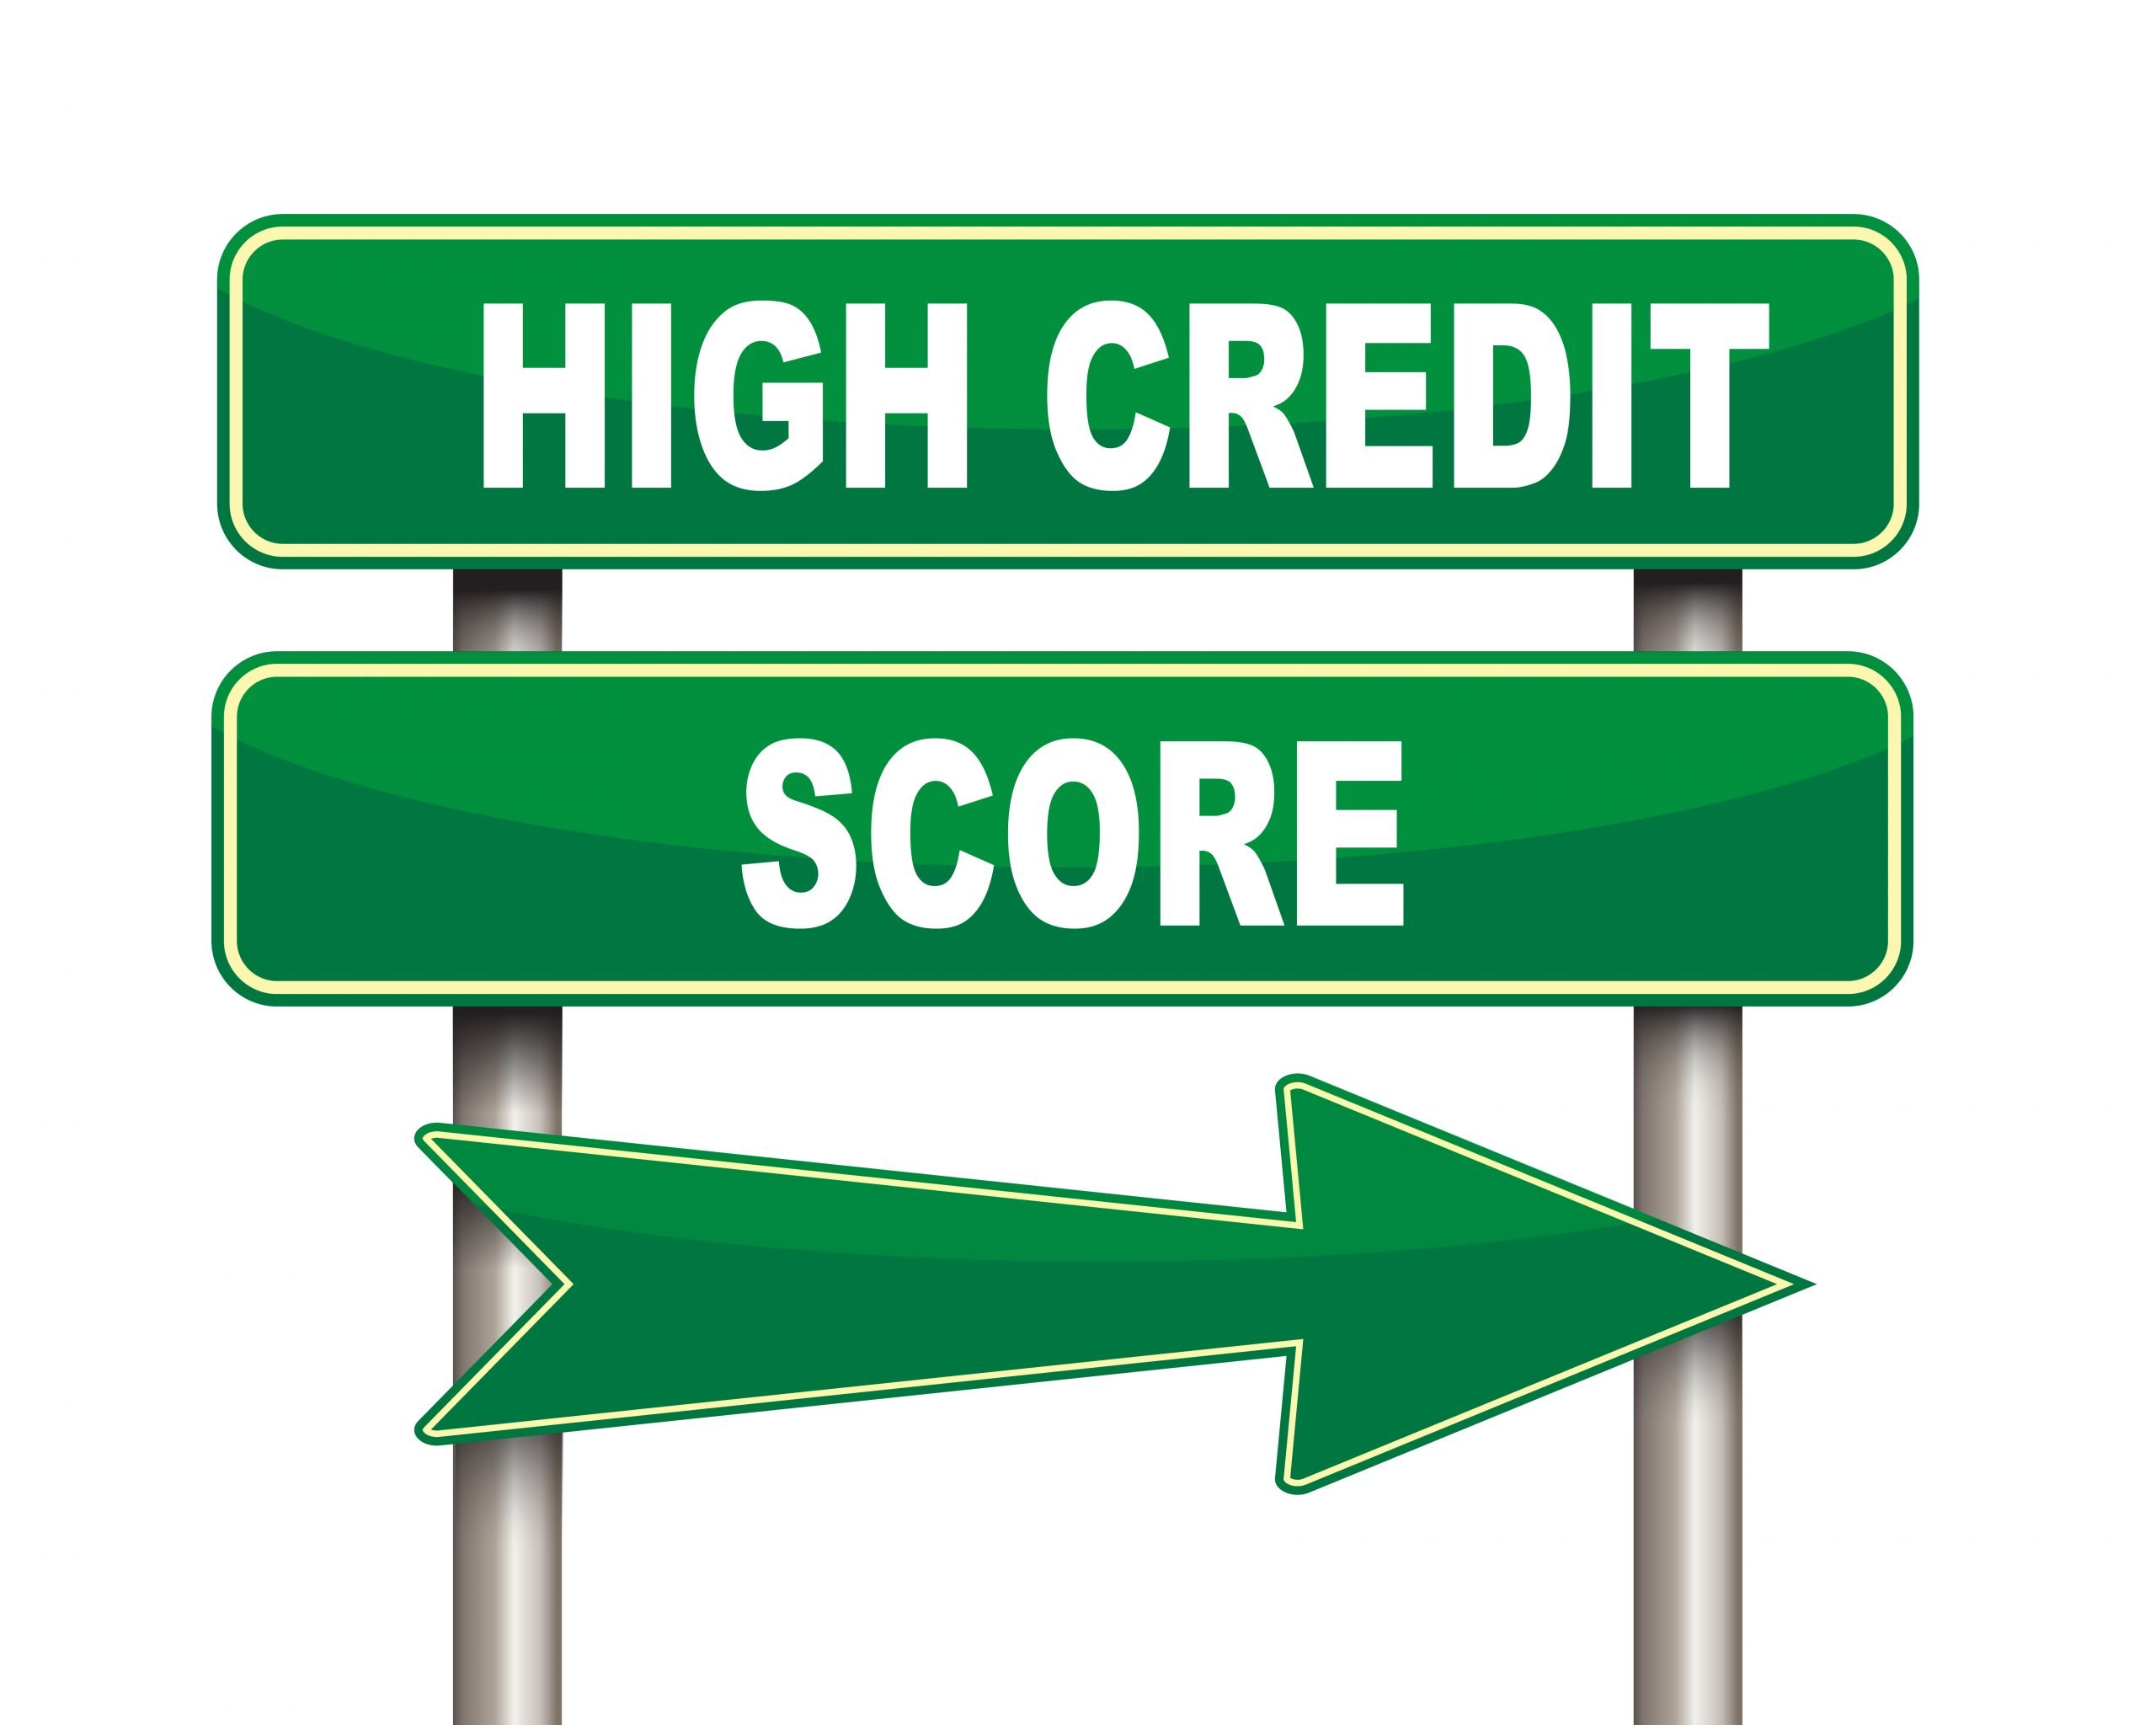 High credit score green road sign